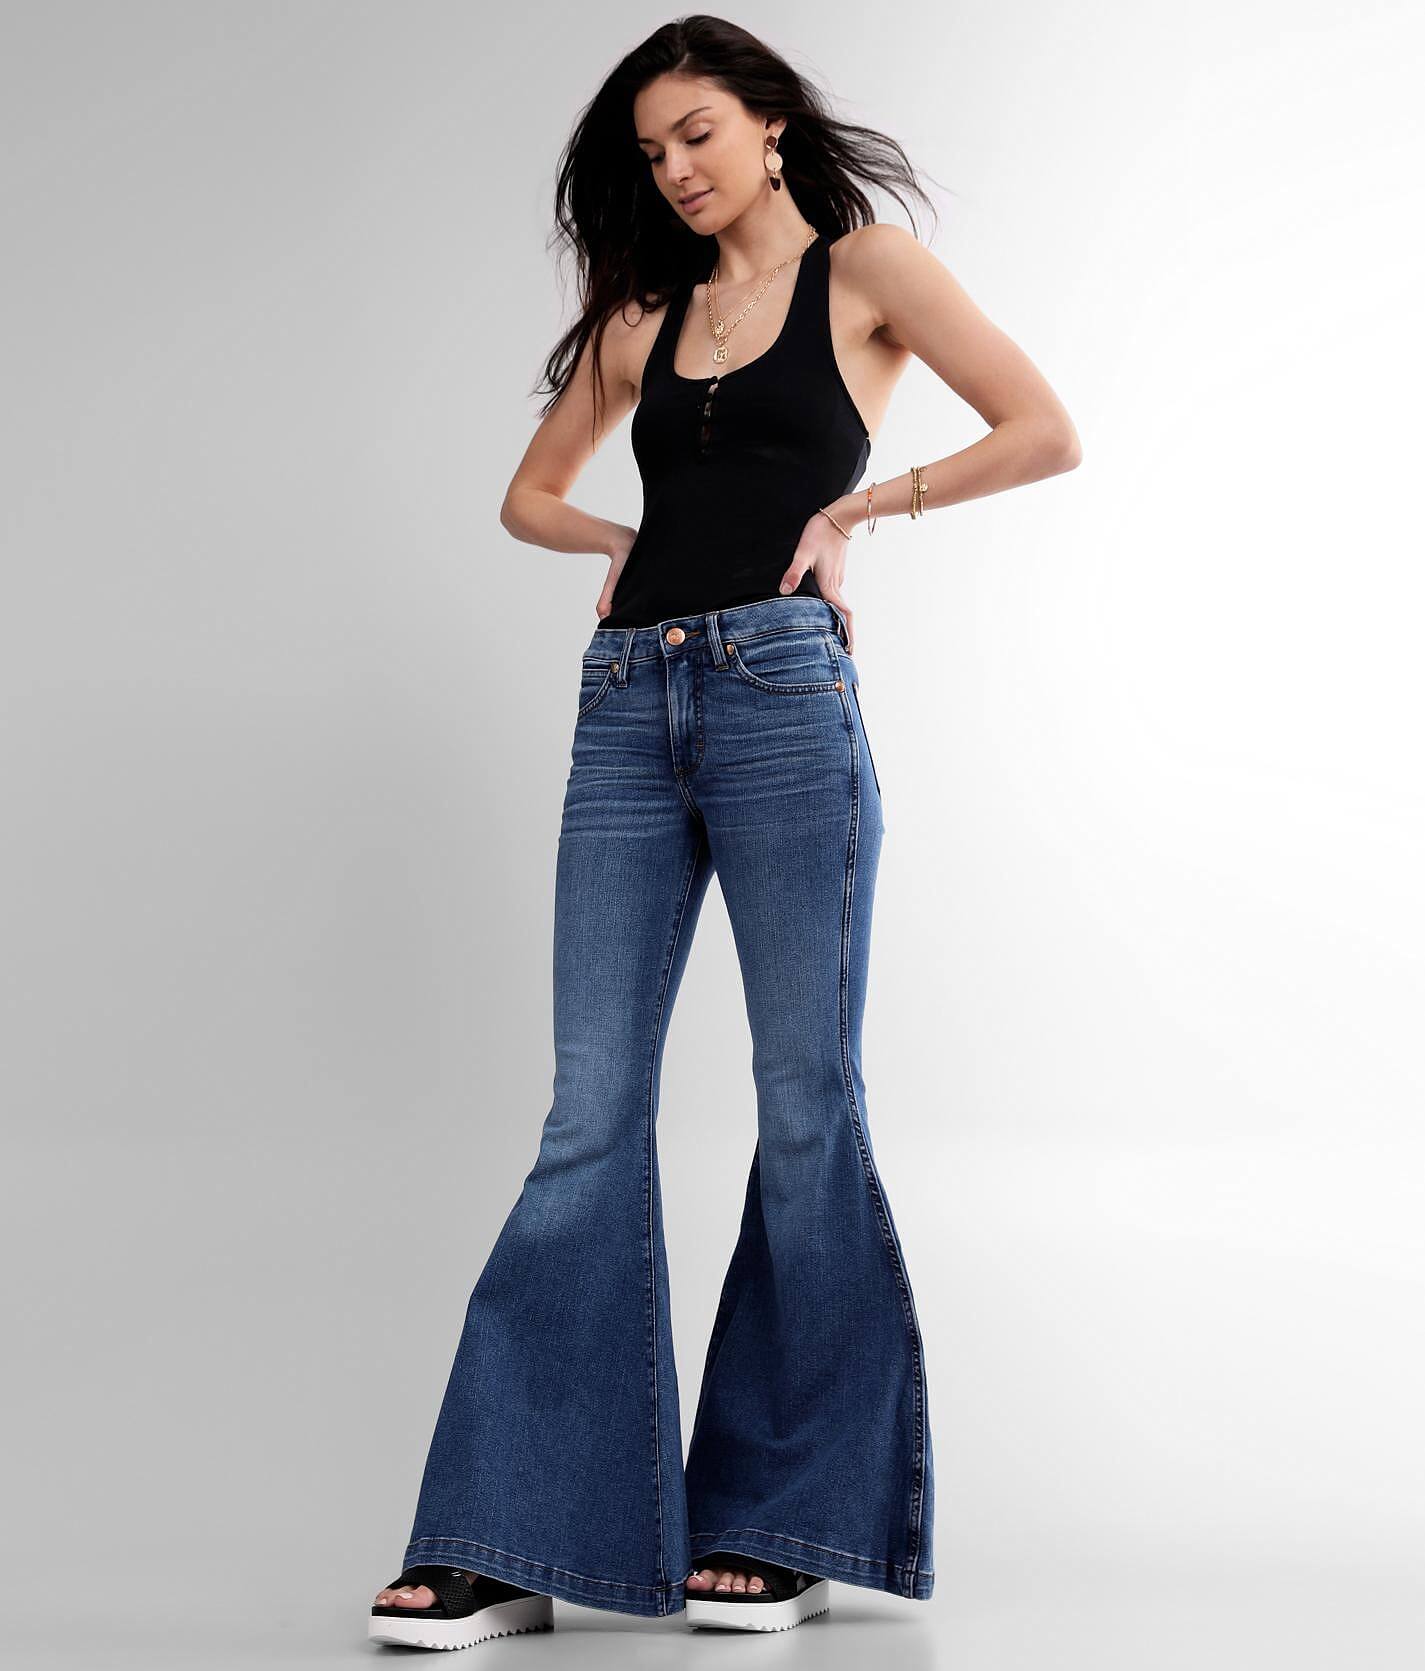 super flare jeans